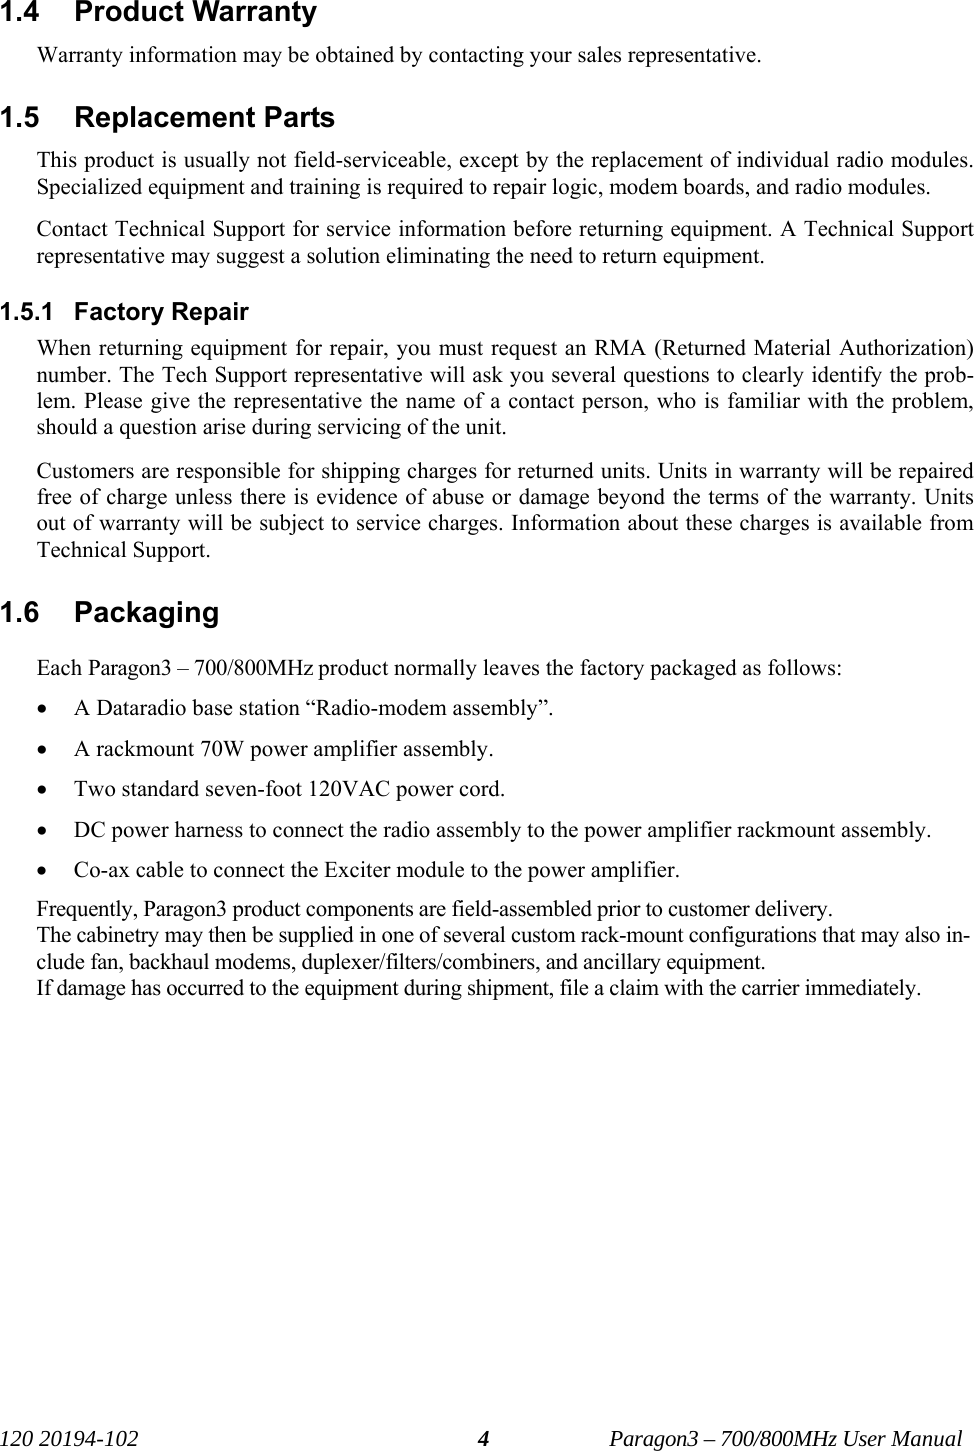   120 20194-102   Paragon3 – 700/800MHz User Manual 41.4 Product Warranty Warranty information may be obtained by contacting your sales representative. 1.5 Replacement Parts This product is usually not field-serviceable, except by the replacement of individual radio modules. Specialized equipment and training is required to repair logic, modem boards, and radio modules. Contact Technical Support for service information before returning equipment. A Technical Support representative may suggest a solution eliminating the need to return equipment. 1.5.1 Factory Repair When returning equipment for repair, you must request an RMA (Returned Material Authorization) number. The Tech Support representative will ask you several questions to clearly identify the prob-lem. Please give the representative the name of a contact person, who is familiar with the problem, should a question arise during servicing of the unit. Customers are responsible for shipping charges for returned units. Units in warranty will be repaired free of charge unless there is evidence of abuse or damage beyond the terms of the warranty. Units out of warranty will be subject to service charges. Information about these charges is available from Technical Support. 1.6 Packaging Each Paragon3 – 700/800MHz product normally leaves the factory packaged as follows: • A Dataradio base station “Radio-modem assembly”. • A rackmount 70W power amplifier assembly. • Two standard seven-foot 120VAC power cord.  • DC power harness to connect the radio assembly to the power amplifier rackmount assembly.  • Co-ax cable to connect the Exciter module to the power amplifier. Frequently, Paragon3 product components are field-assembled prior to customer delivery.  The cabinetry may then be supplied in one of several custom rack-mount configurations that may also in-clude fan, backhaul modems, duplexer/filters/combiners, and ancillary equipment.  If damage has occurred to the equipment during shipment, file a claim with the carrier immediately. 